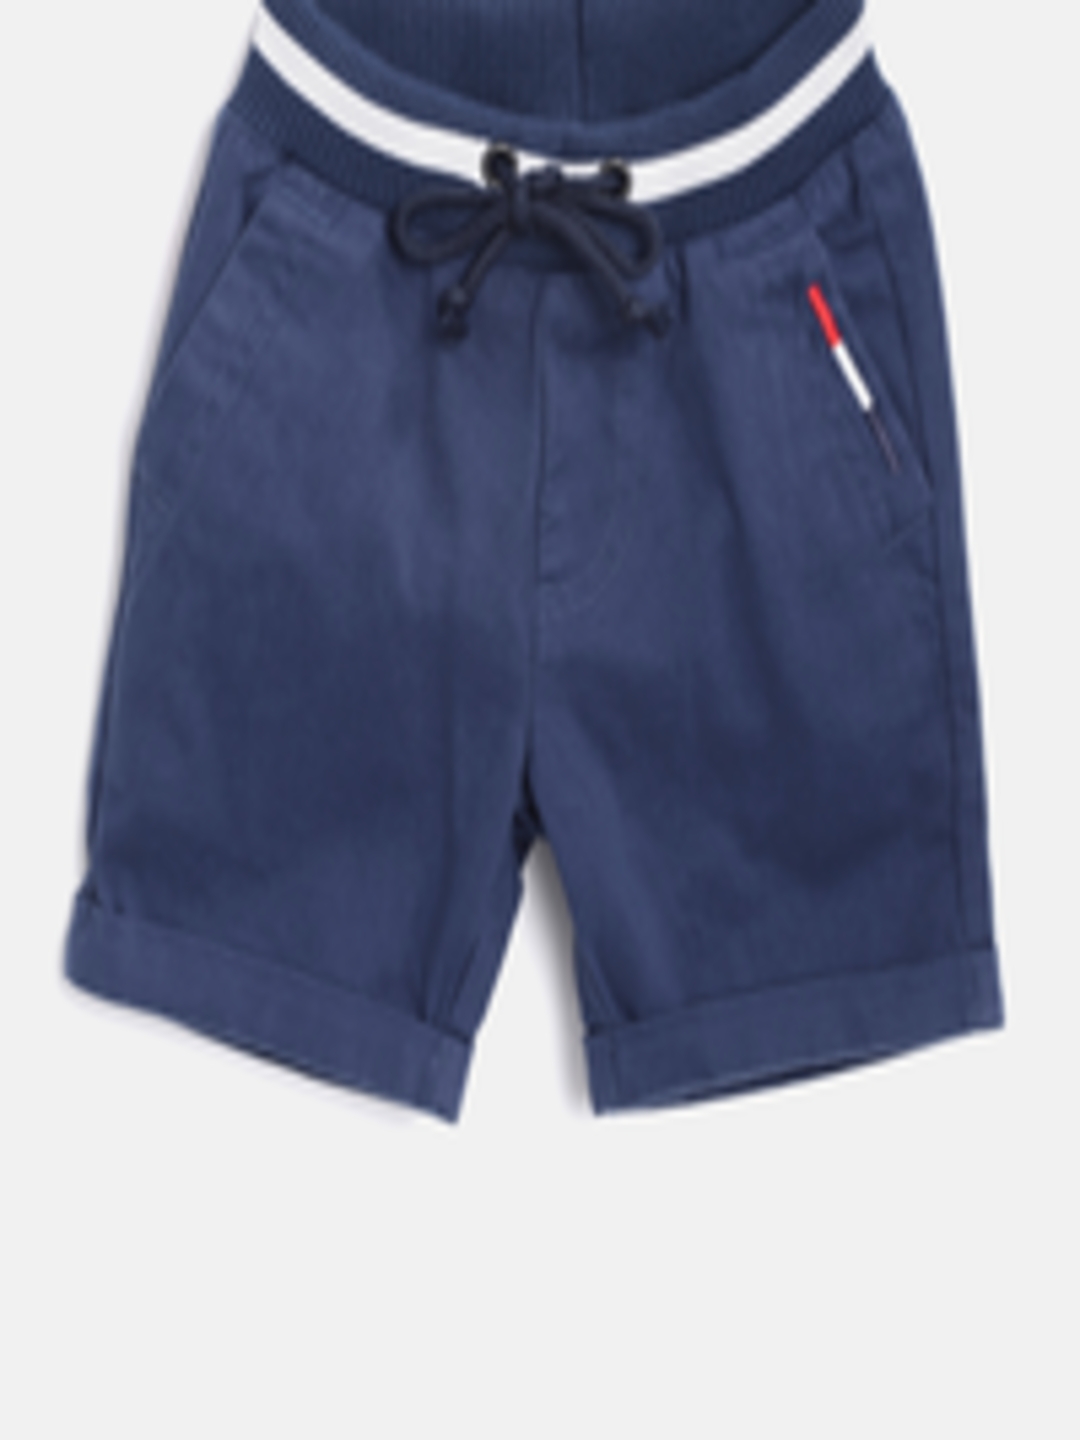 Buy United Colors Of Benetton Boys Navy Blue Solid Regular Fit Shorts ...